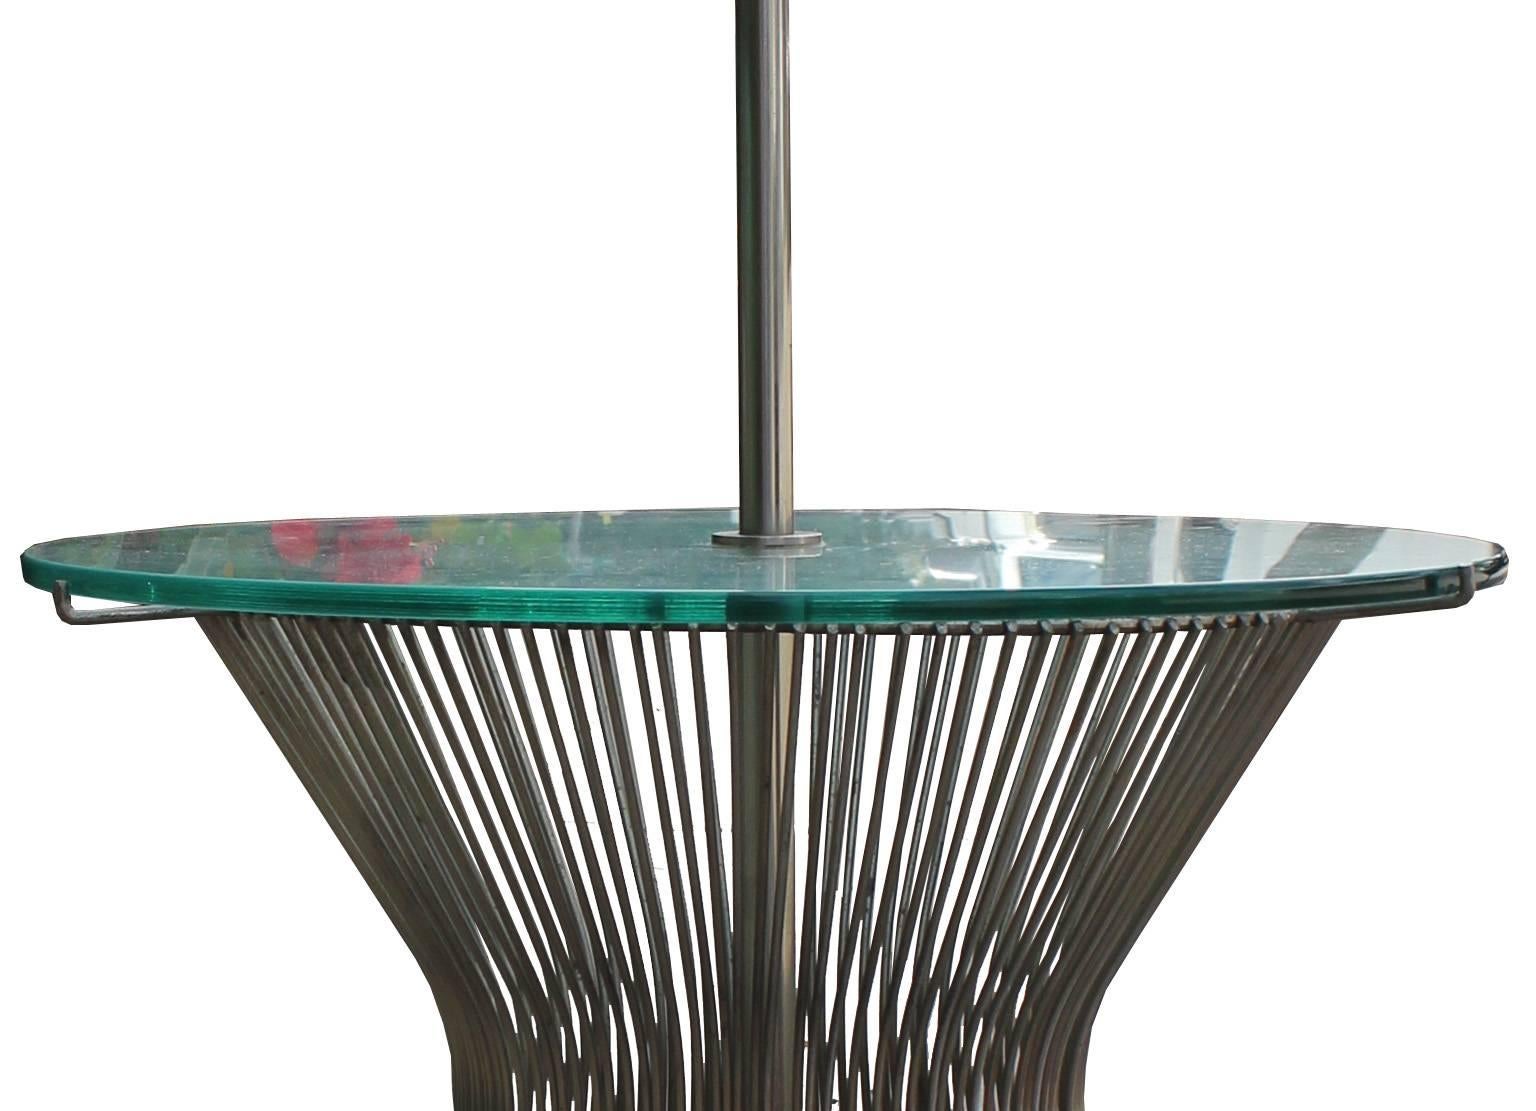 Lamp side table by Laurel in the style of Warren Platner for Knoll. Wire frame base is topped with thick cut-glass.